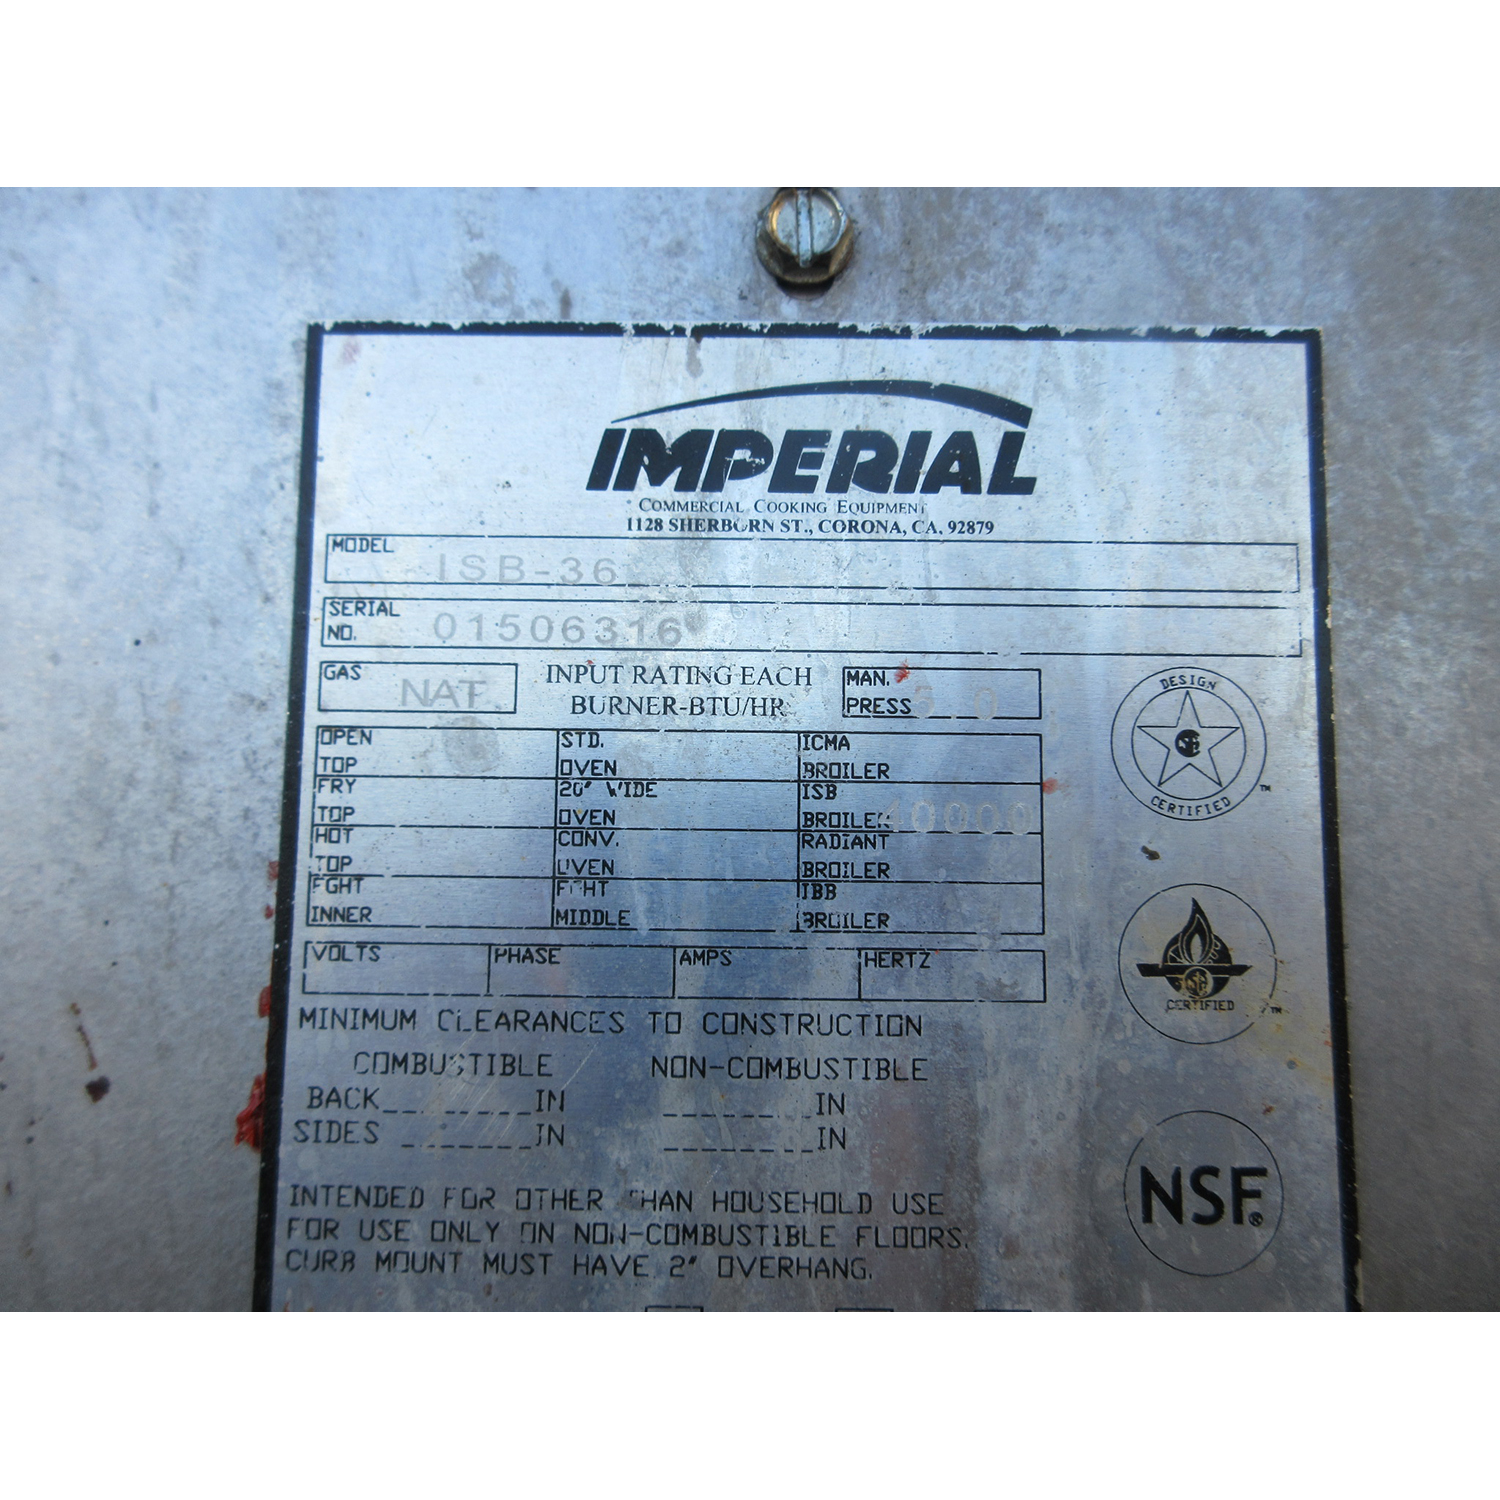 Imperial IR-6-IRSB 6 Burner Range with Salamander Broiler, Gas, Used Excellent Condition image 5